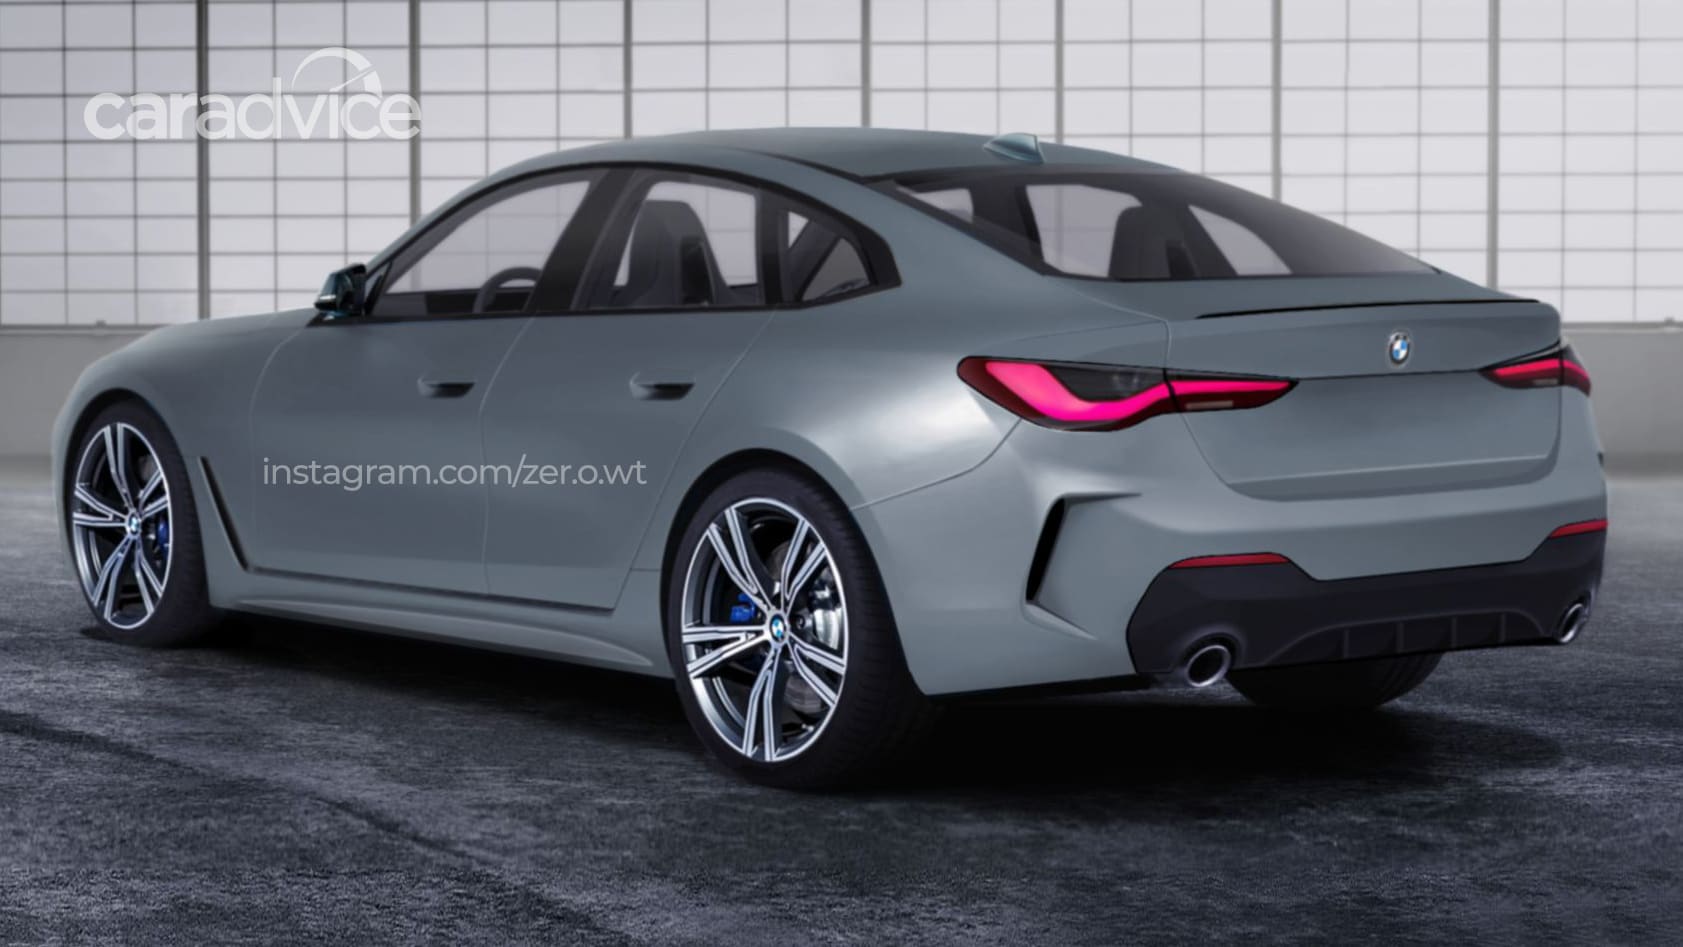 2021 BMW 4 Series Gran Coupe rendered | CarAdvice